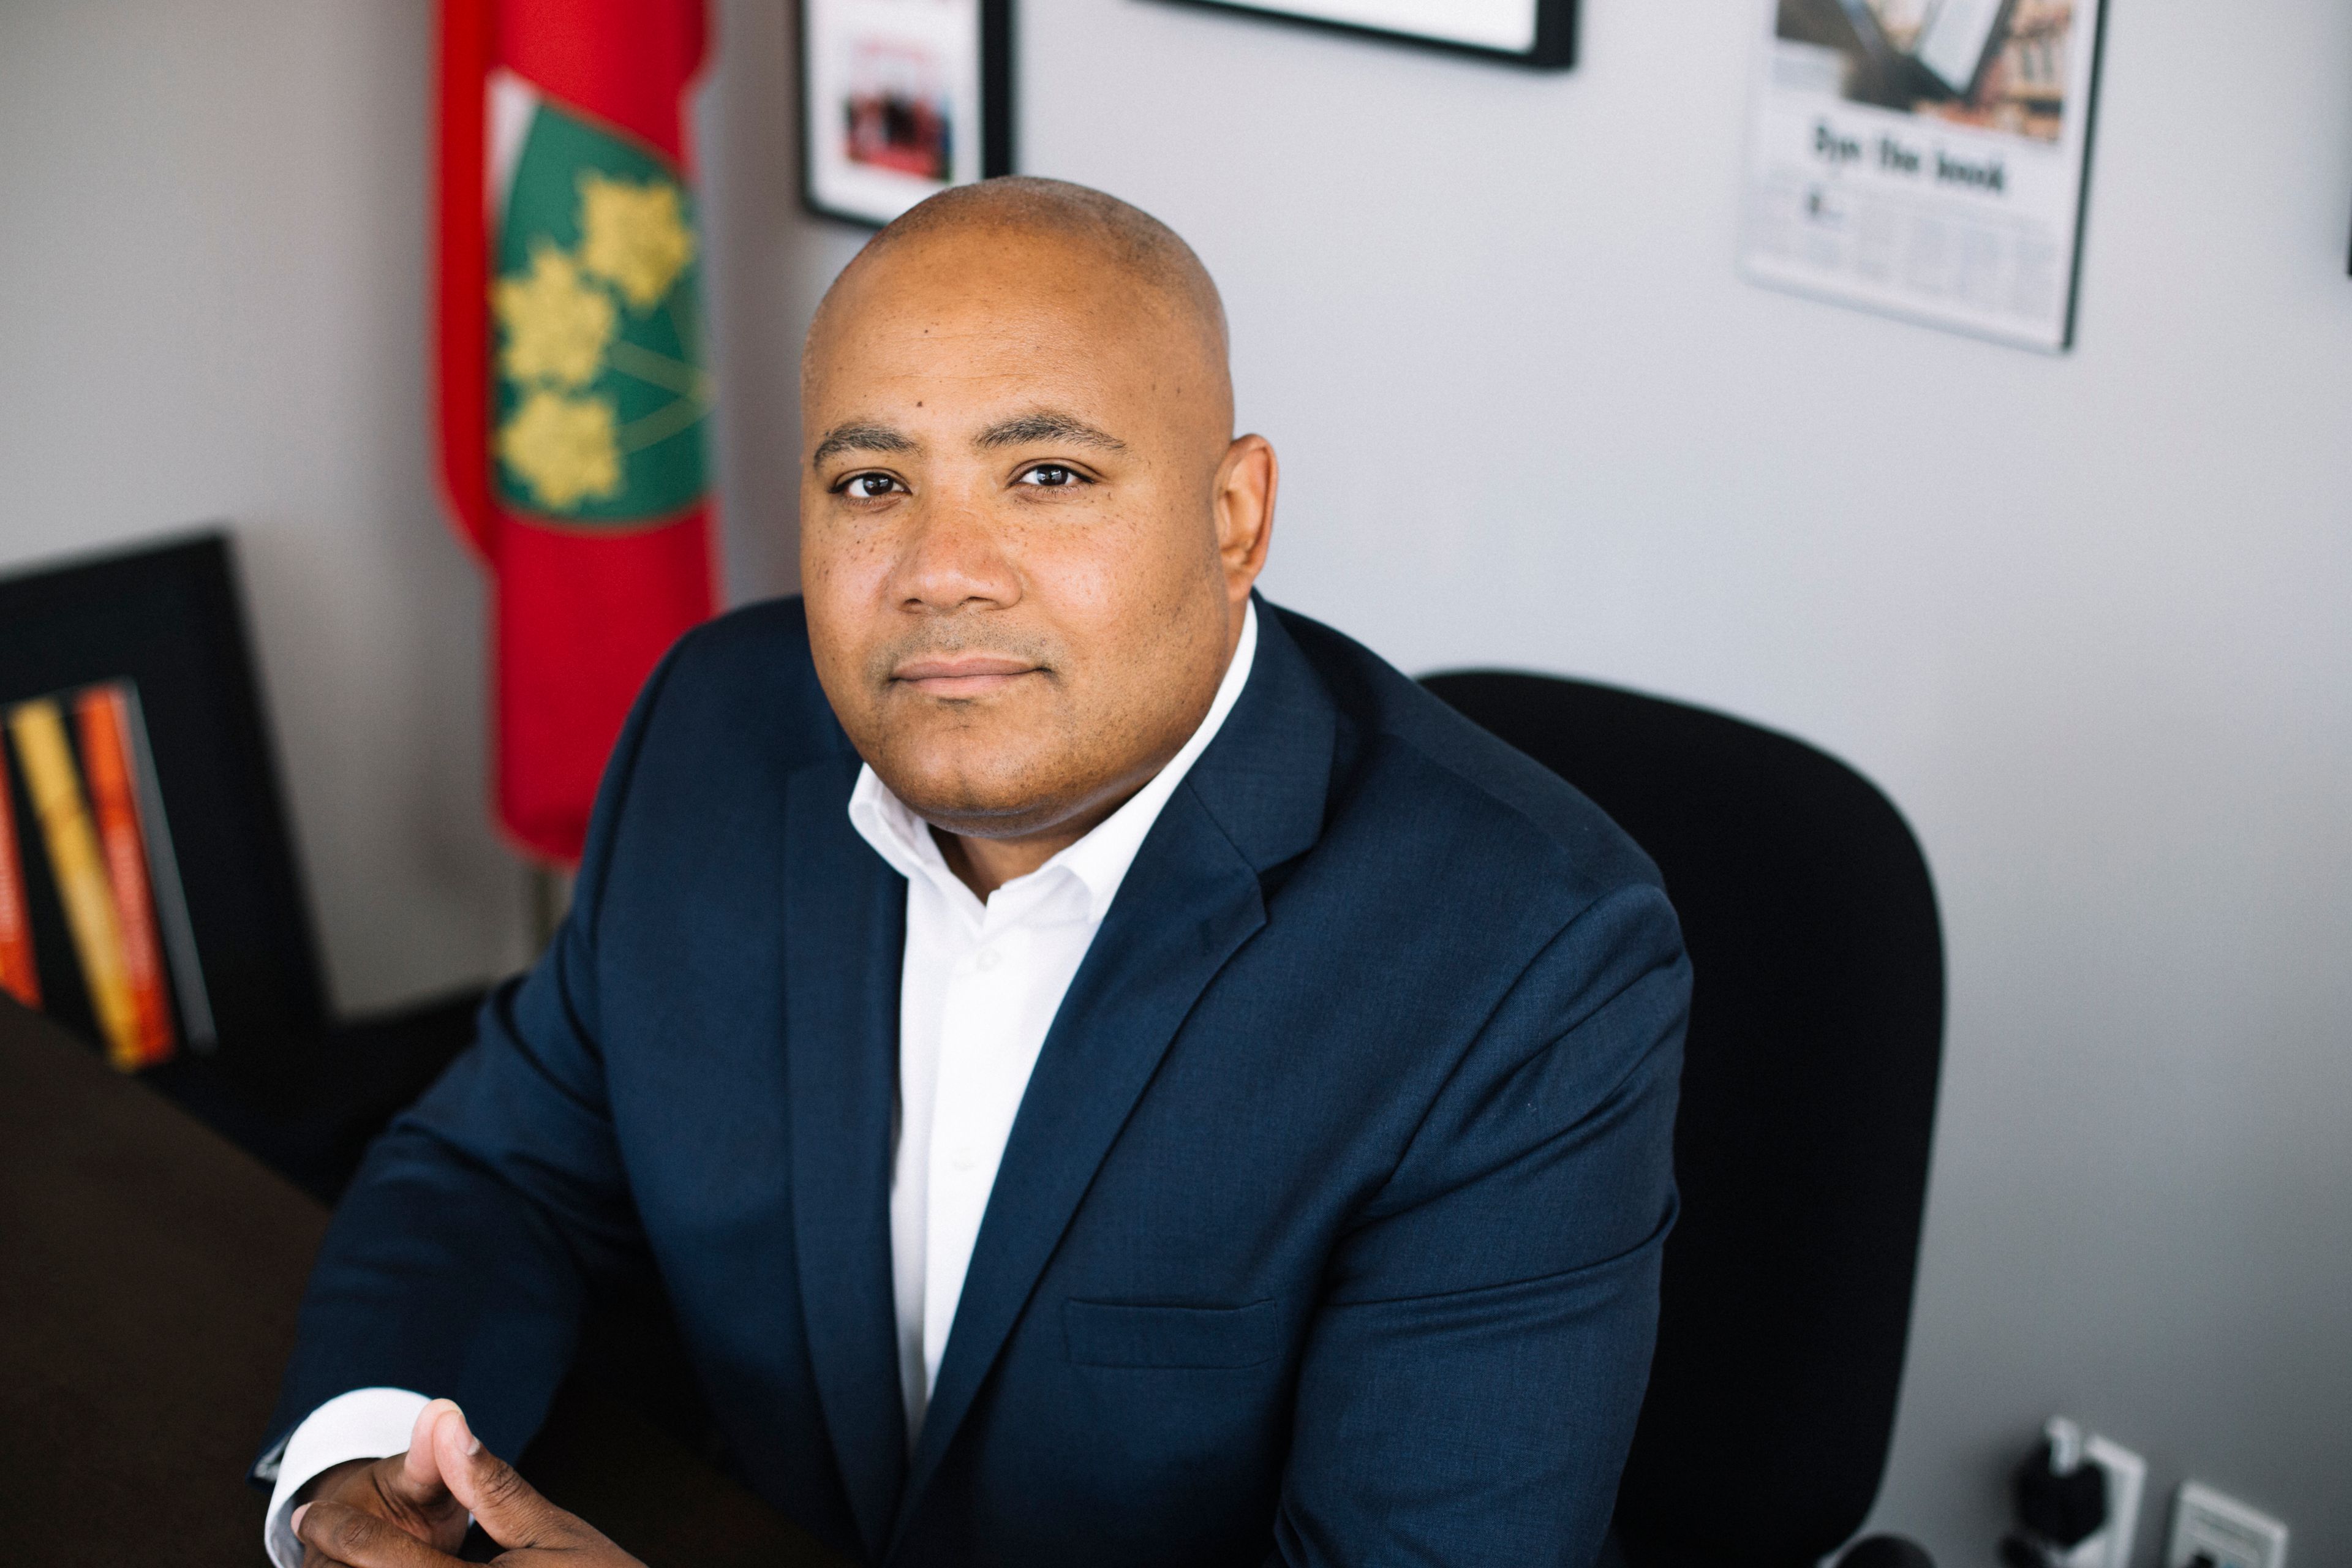 Michael Coteau in his Toronto office. (Photograph by Jalani Morgan)